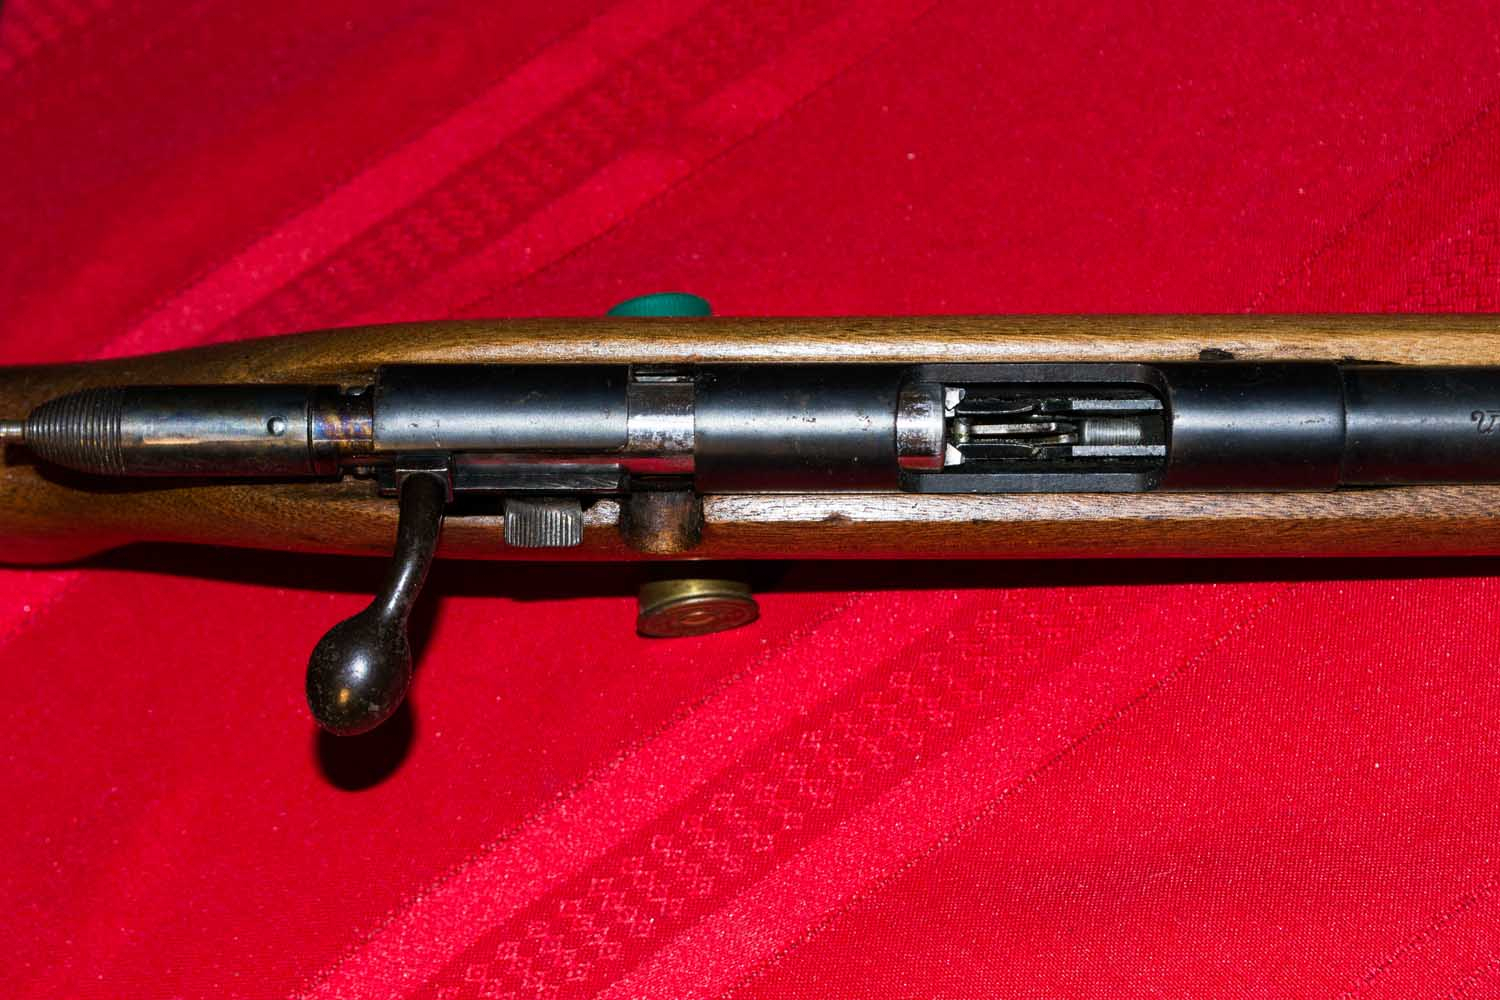 The receiver of Remington 512, chambered for .22 Long